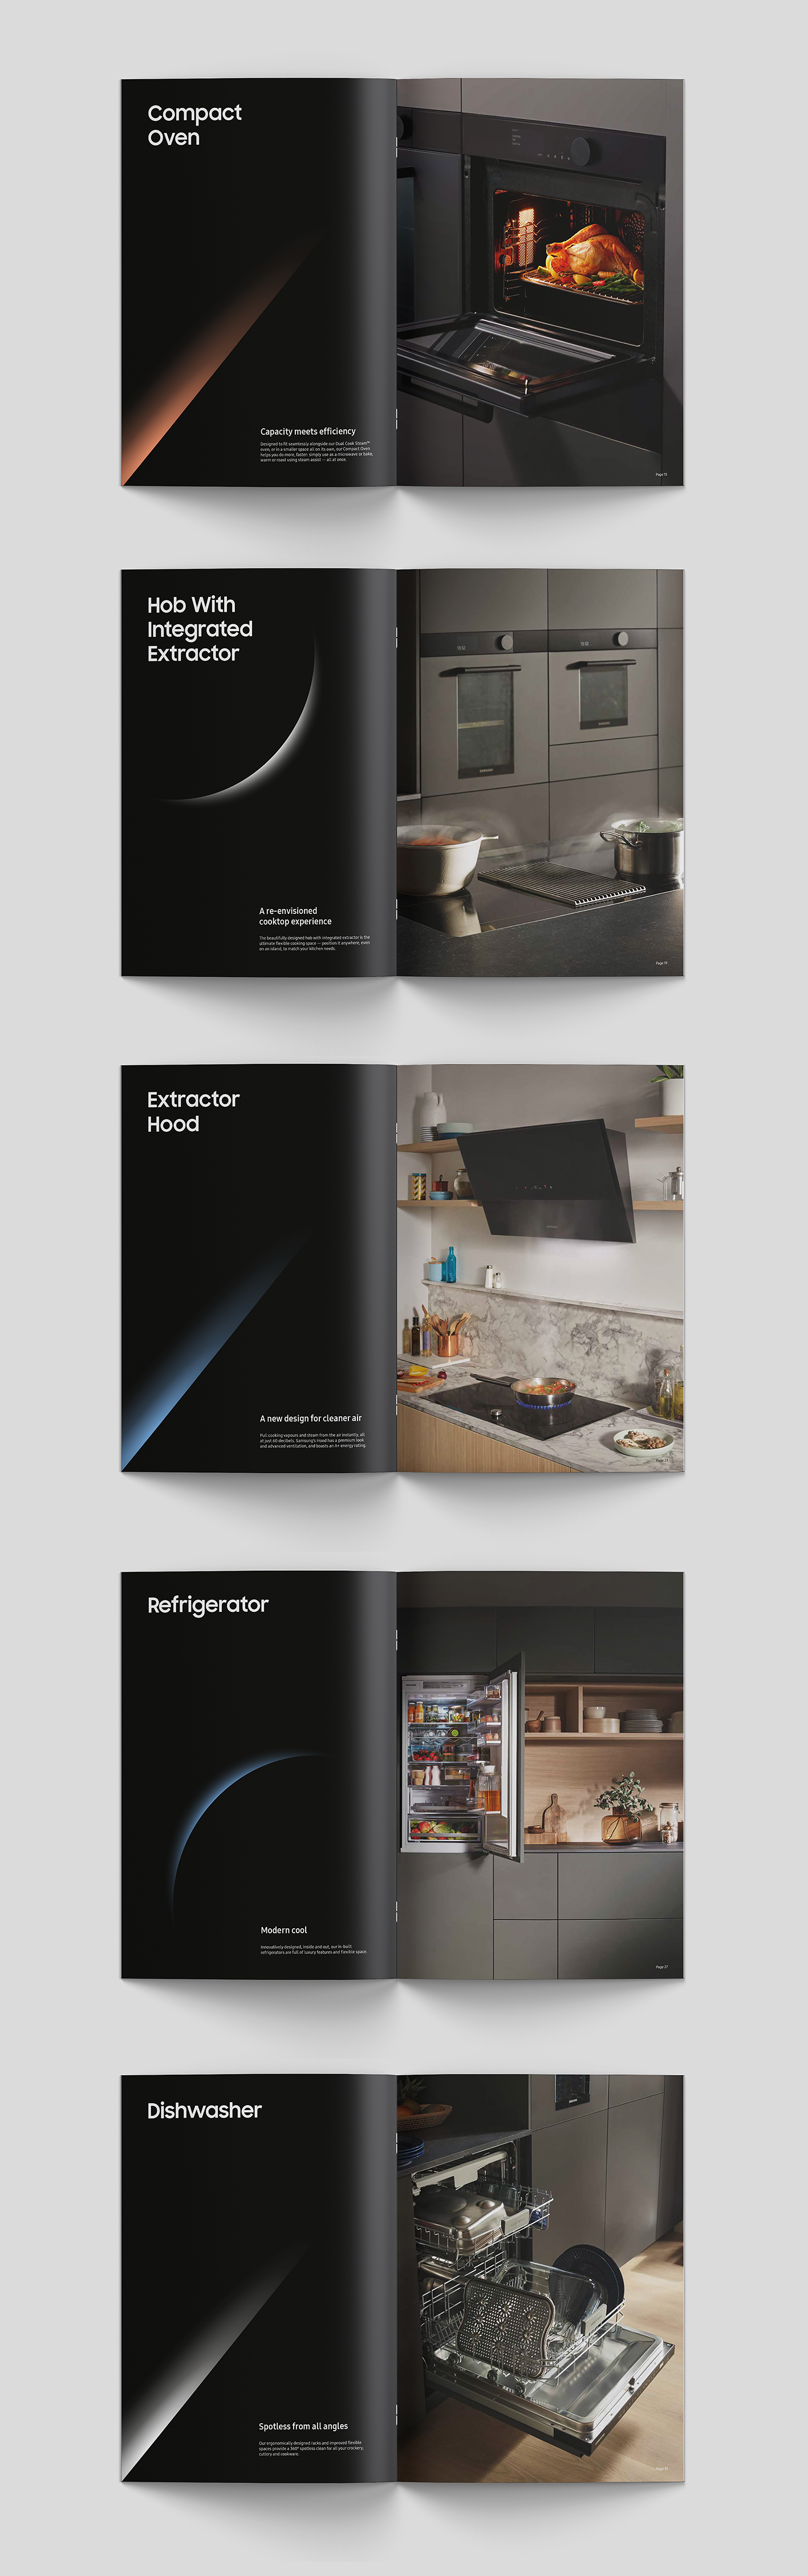 SAMSUNG BROCHURE_all product pages.png